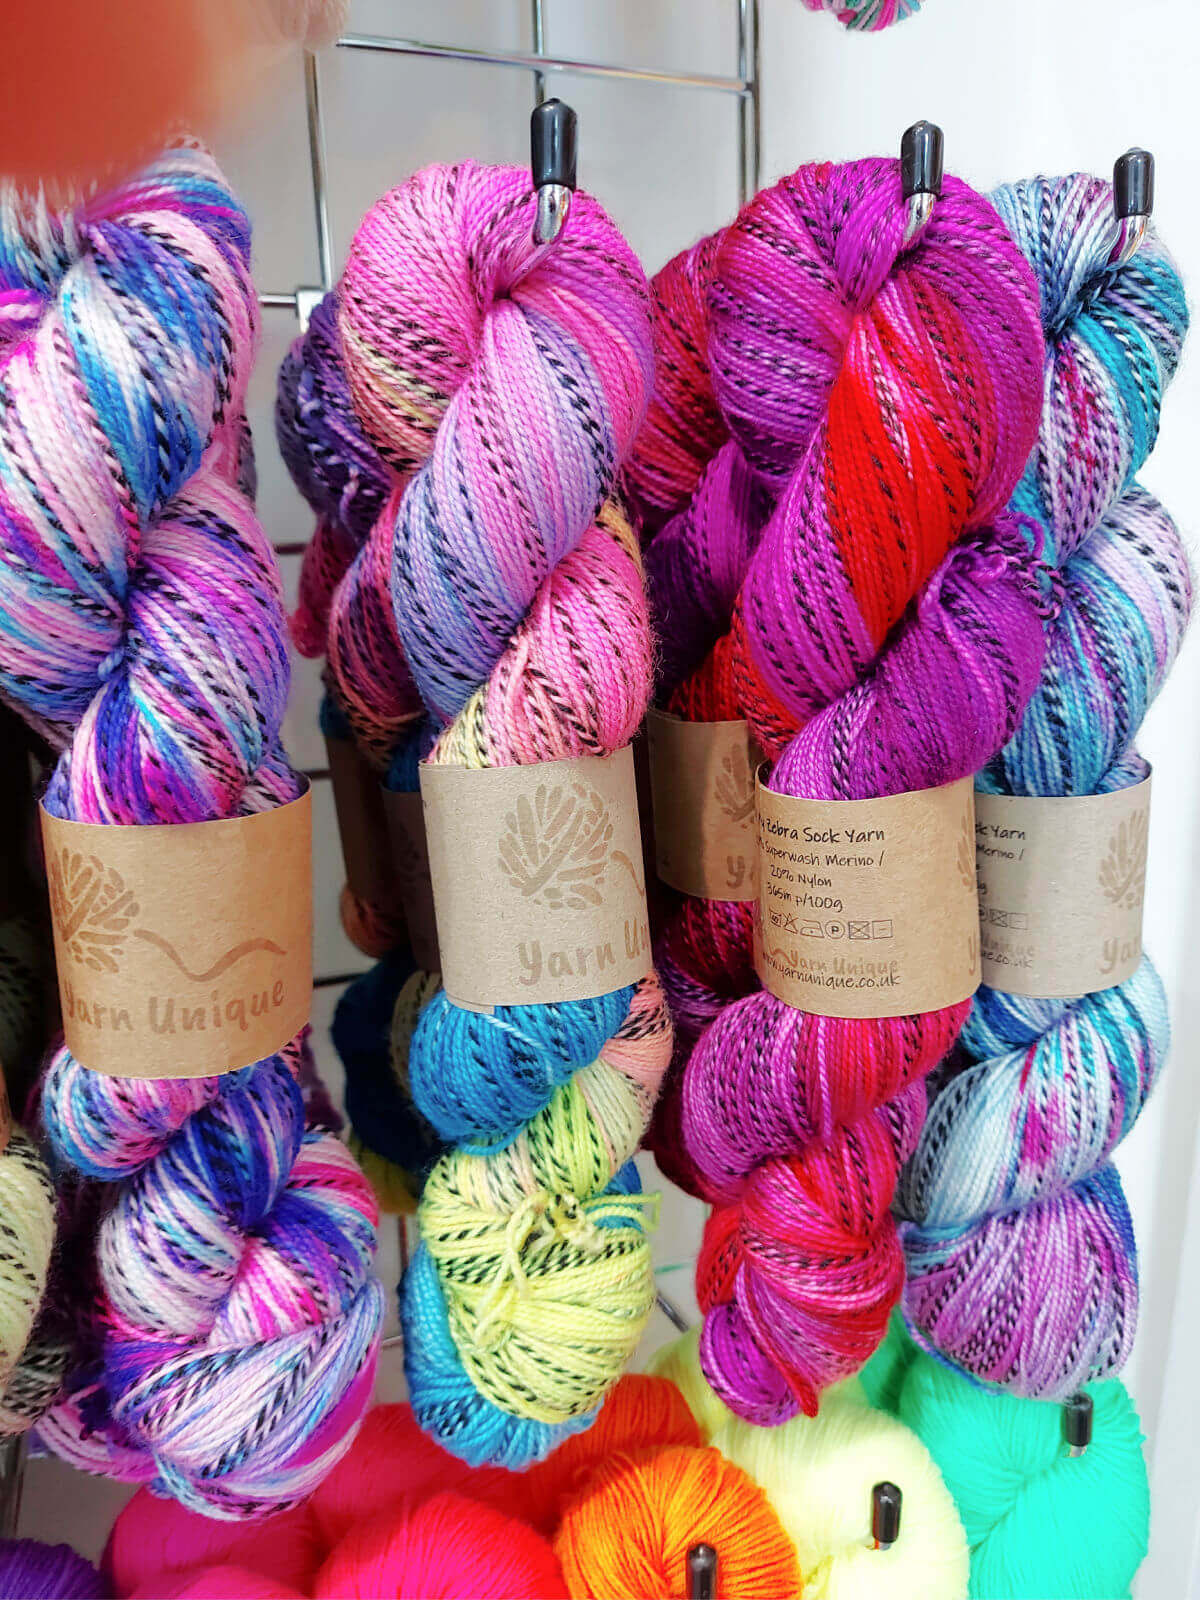 Large skeins of multi-coloured yarn with a black fleck running through them hang from a rack.